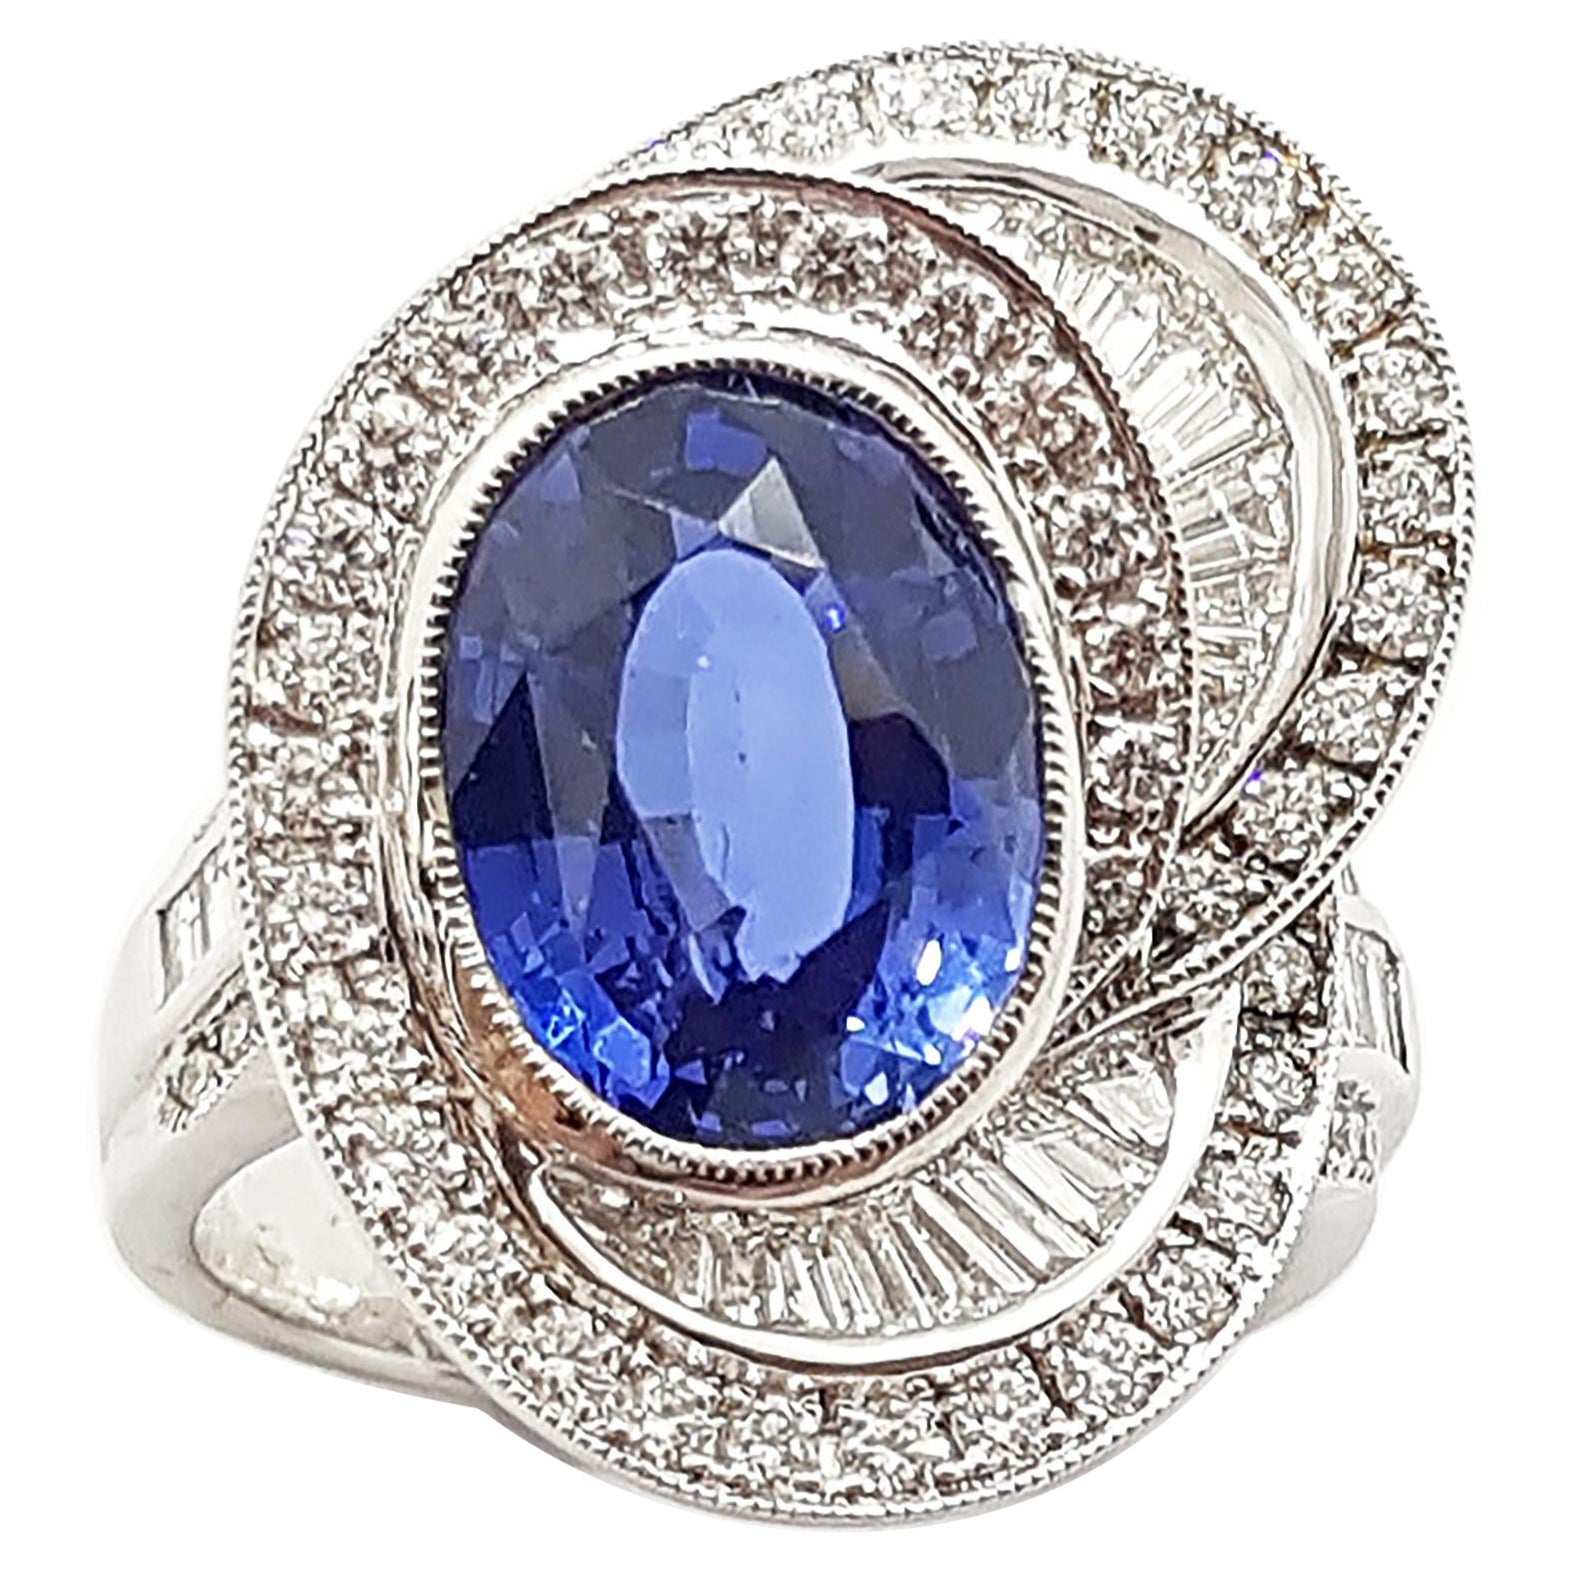 Blue Sapphire with Diamond Ring Set in Platinum 950 Settings